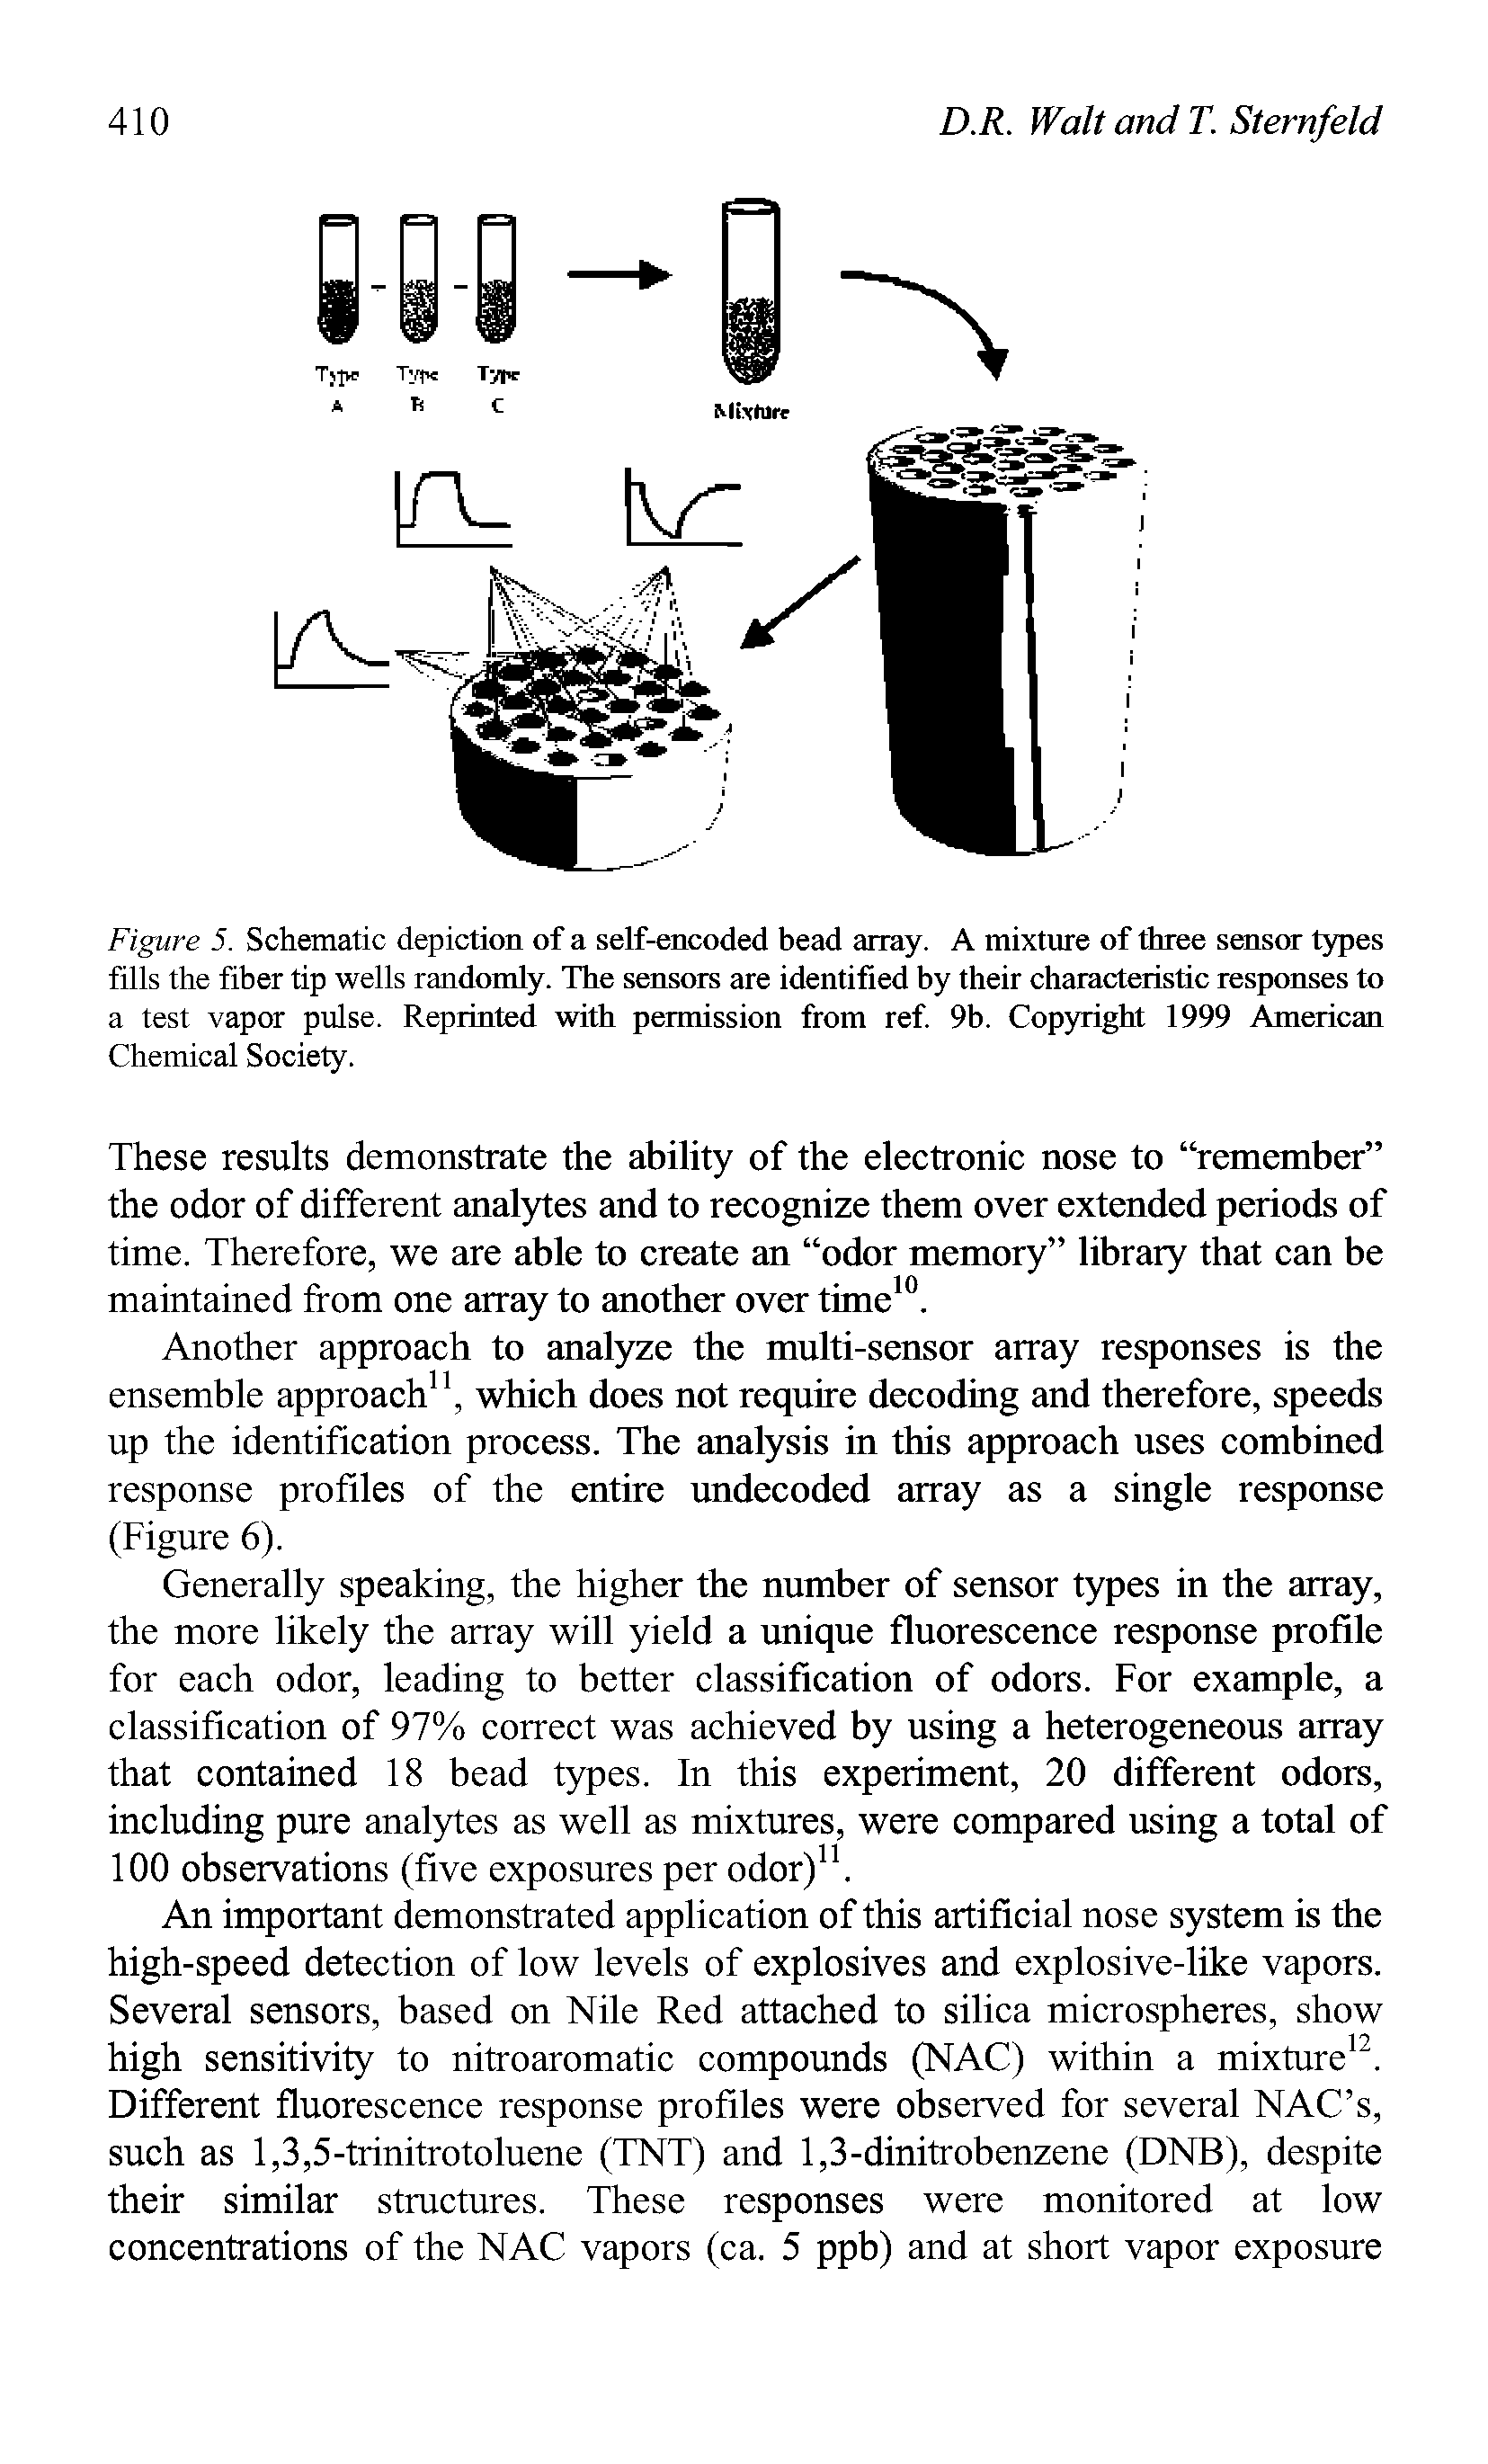 Figure 5. Schematic depiction of a self-encoded bead array. A mixture of three sensor types fills the fiber tip wells randomly. The sensors are identified by their characteristic responses to a test vapor pulse. Reprinted with permission from ref. 9b. Copyright 1999 American Chemical Society.